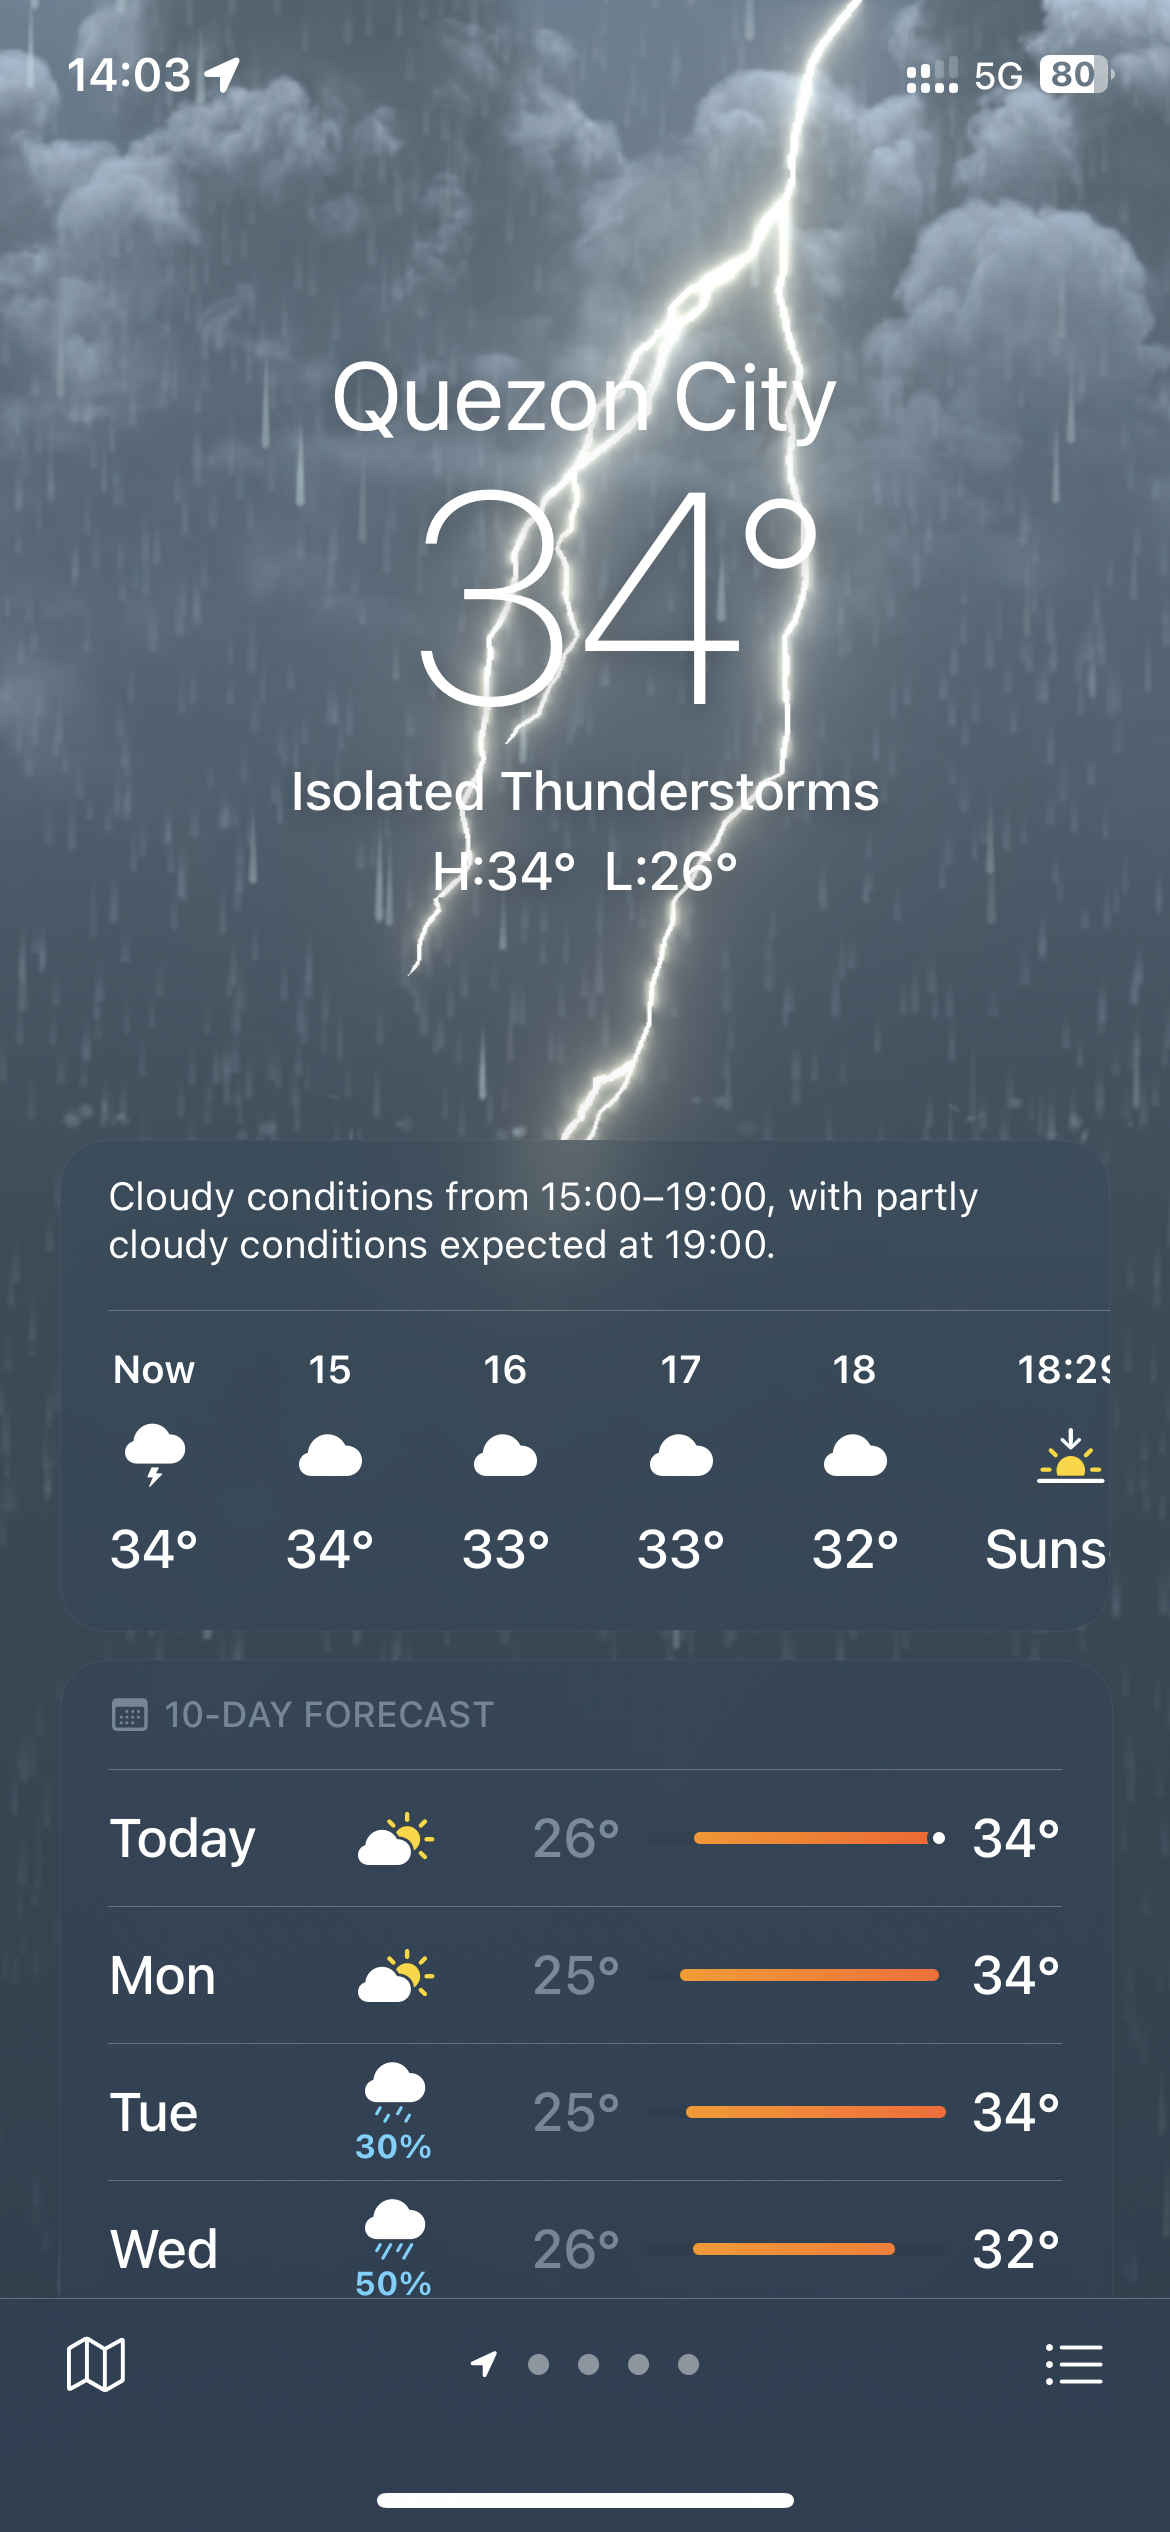 screenshot of the iOS Weather app, showing that the current temperature is 34 degrees Celsius in Quezon City, with isolated thunderstorms.